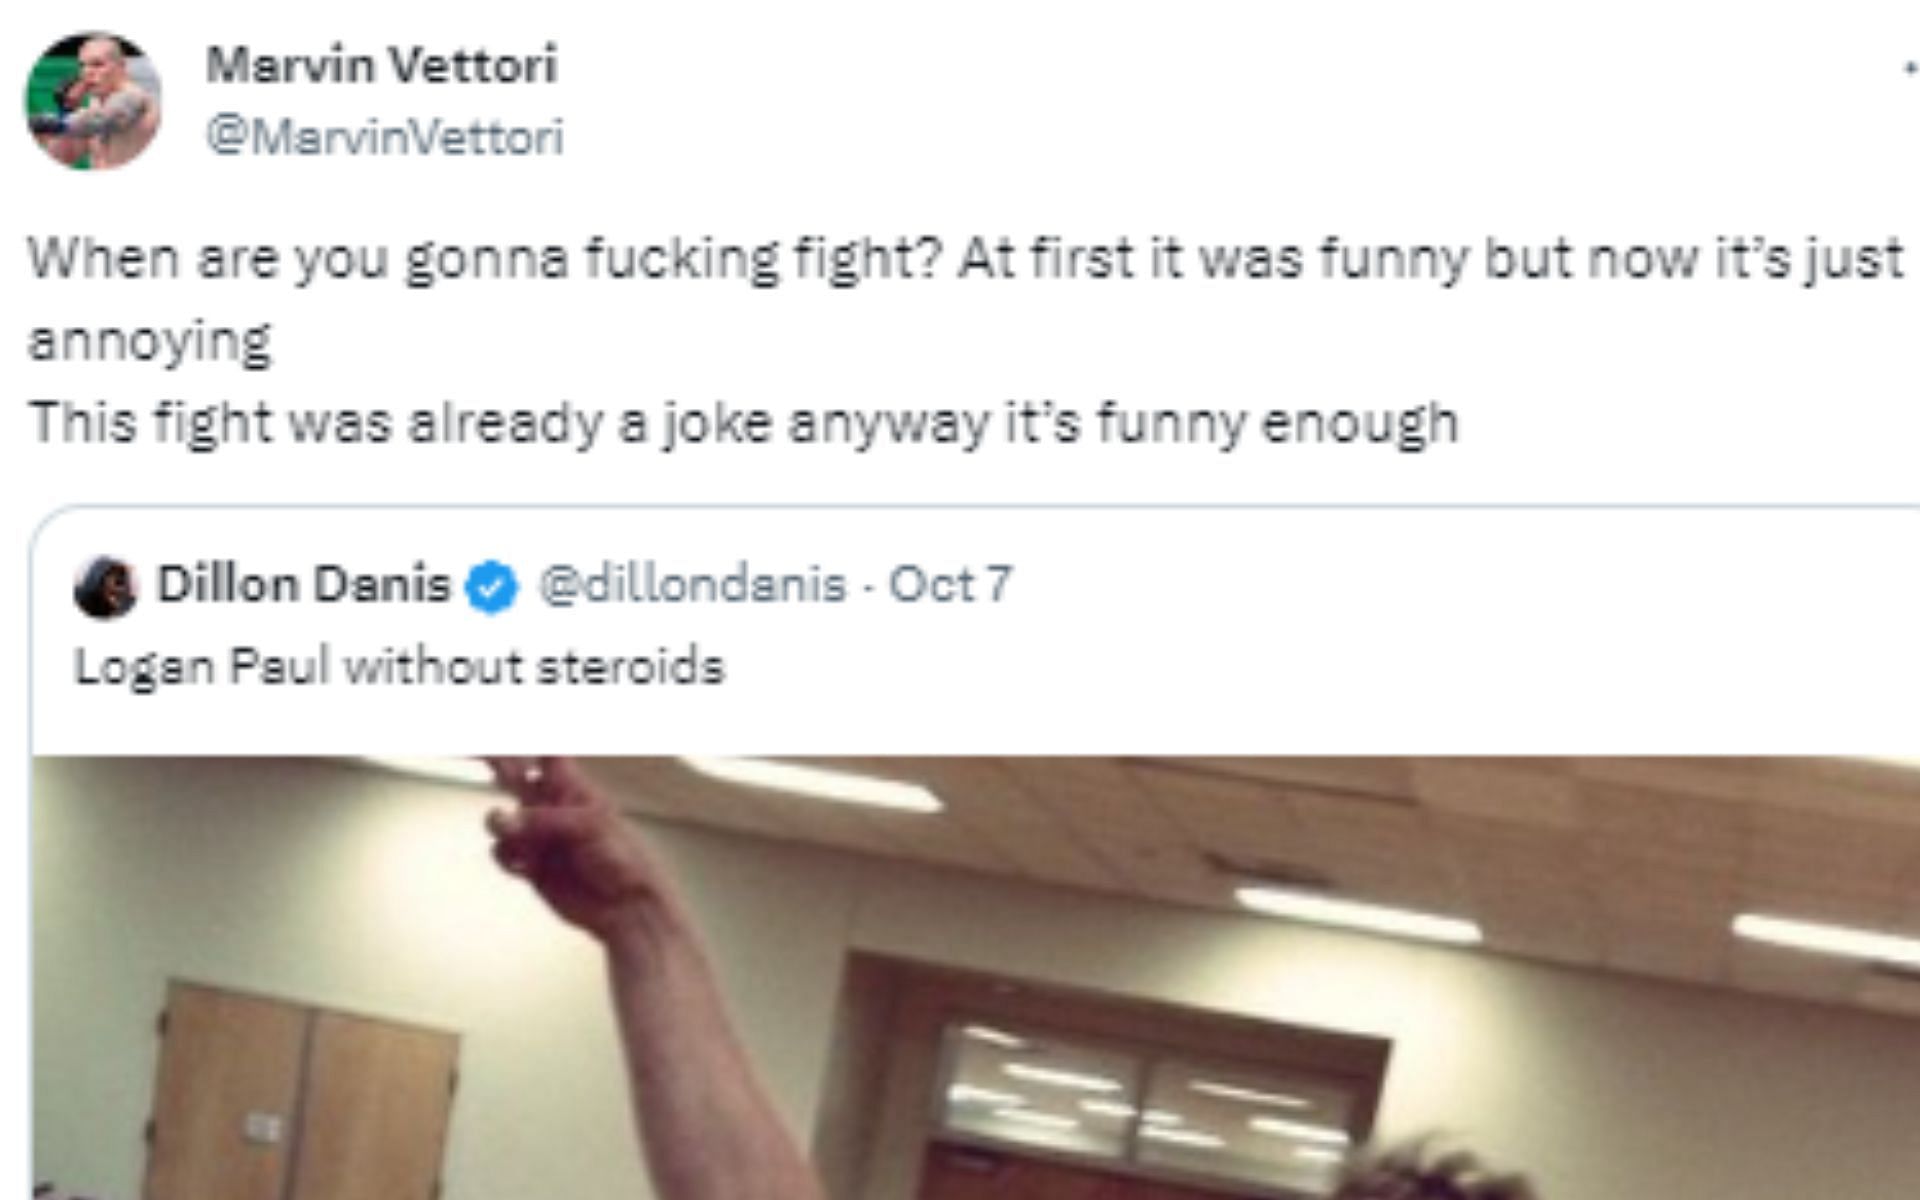 UFC fighter Marvin Vettori reacts to Dillon Danis&#039; post